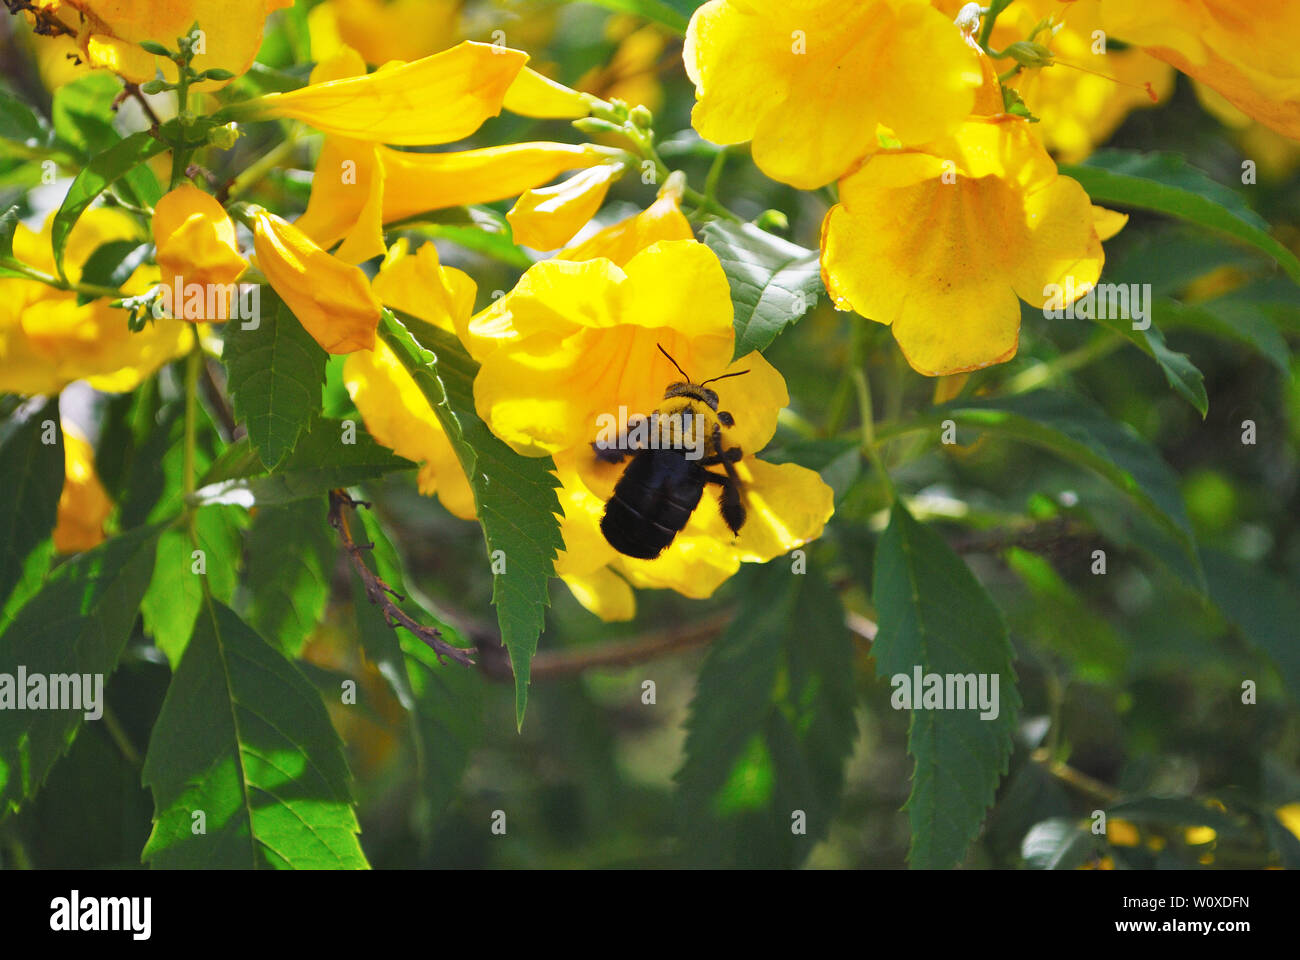 Carpenter bees is flying to find nectar from the yellow flower called Yellow trumpet-flower. Stock Photo